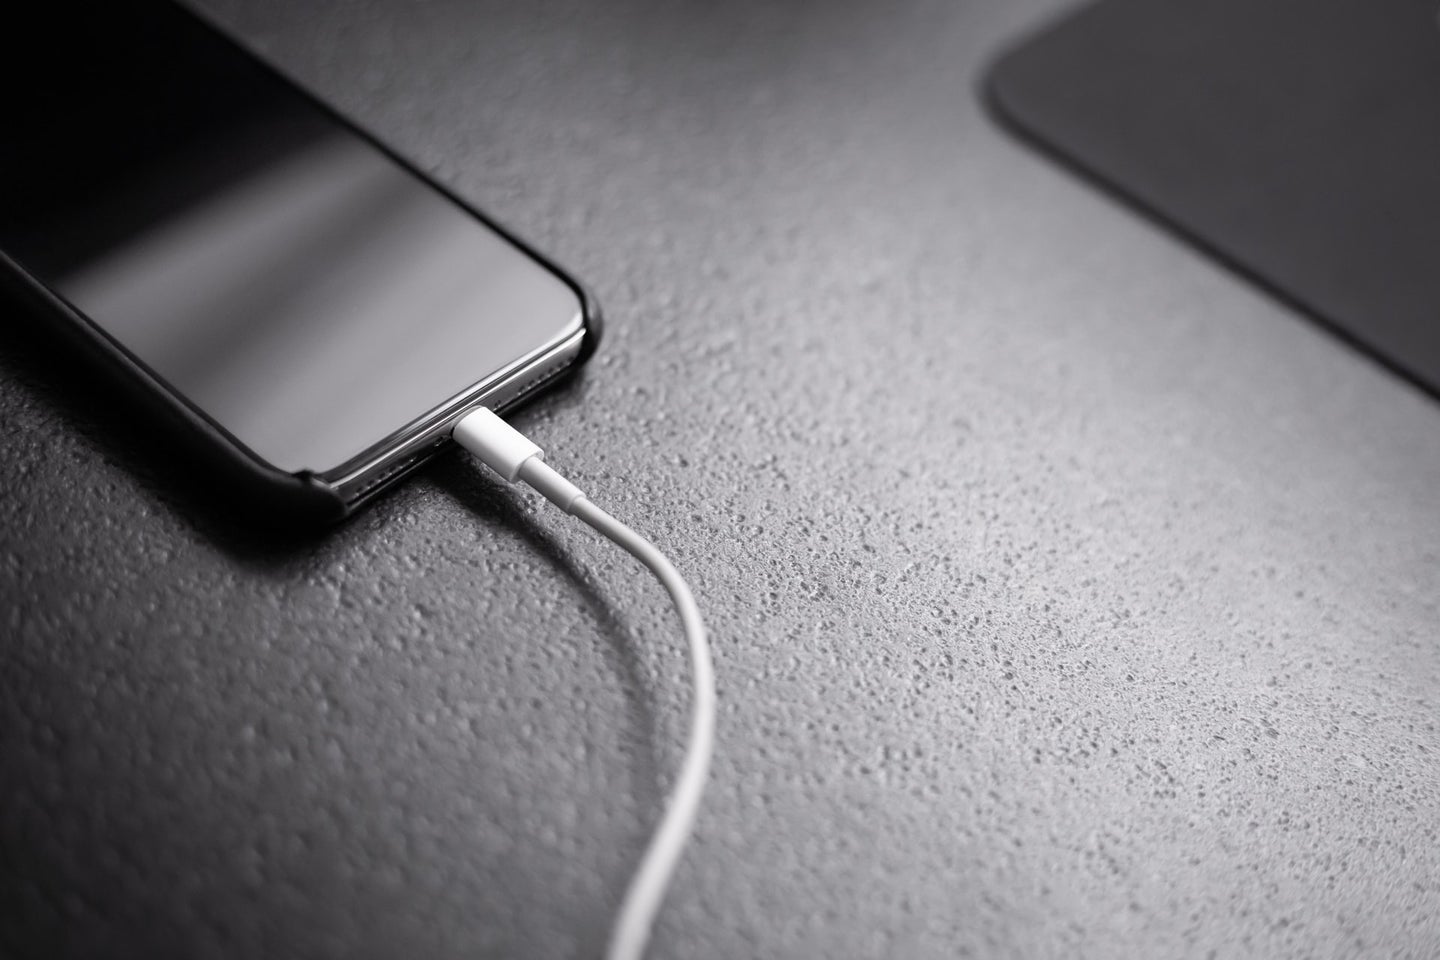 The European Commission may vote that all devices sold in the EU are chargeable via USB-C.